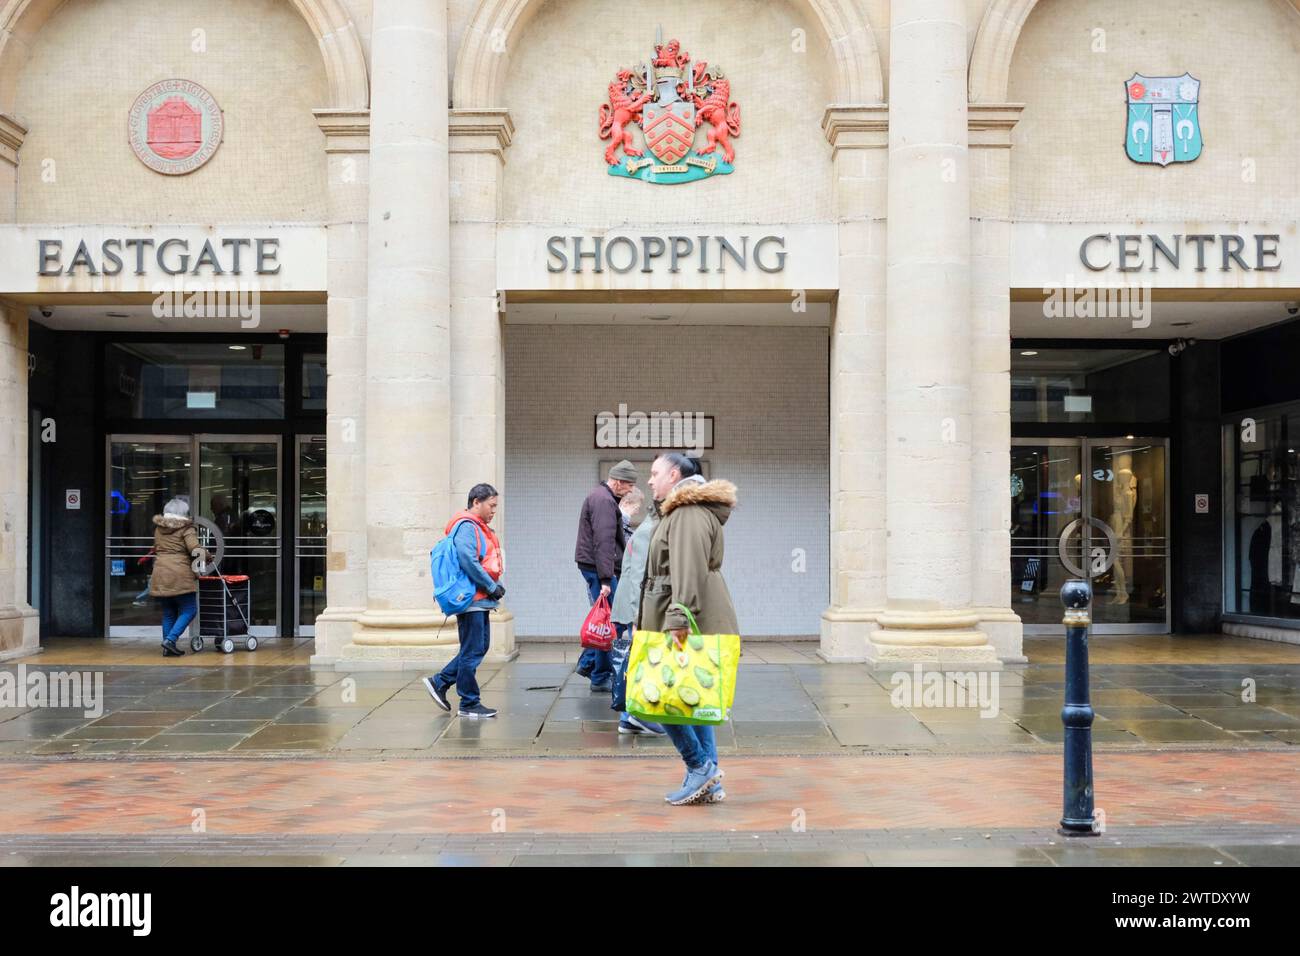 The Eastgate shopping centre in Gloucester UK on a rainy day Stock Photo